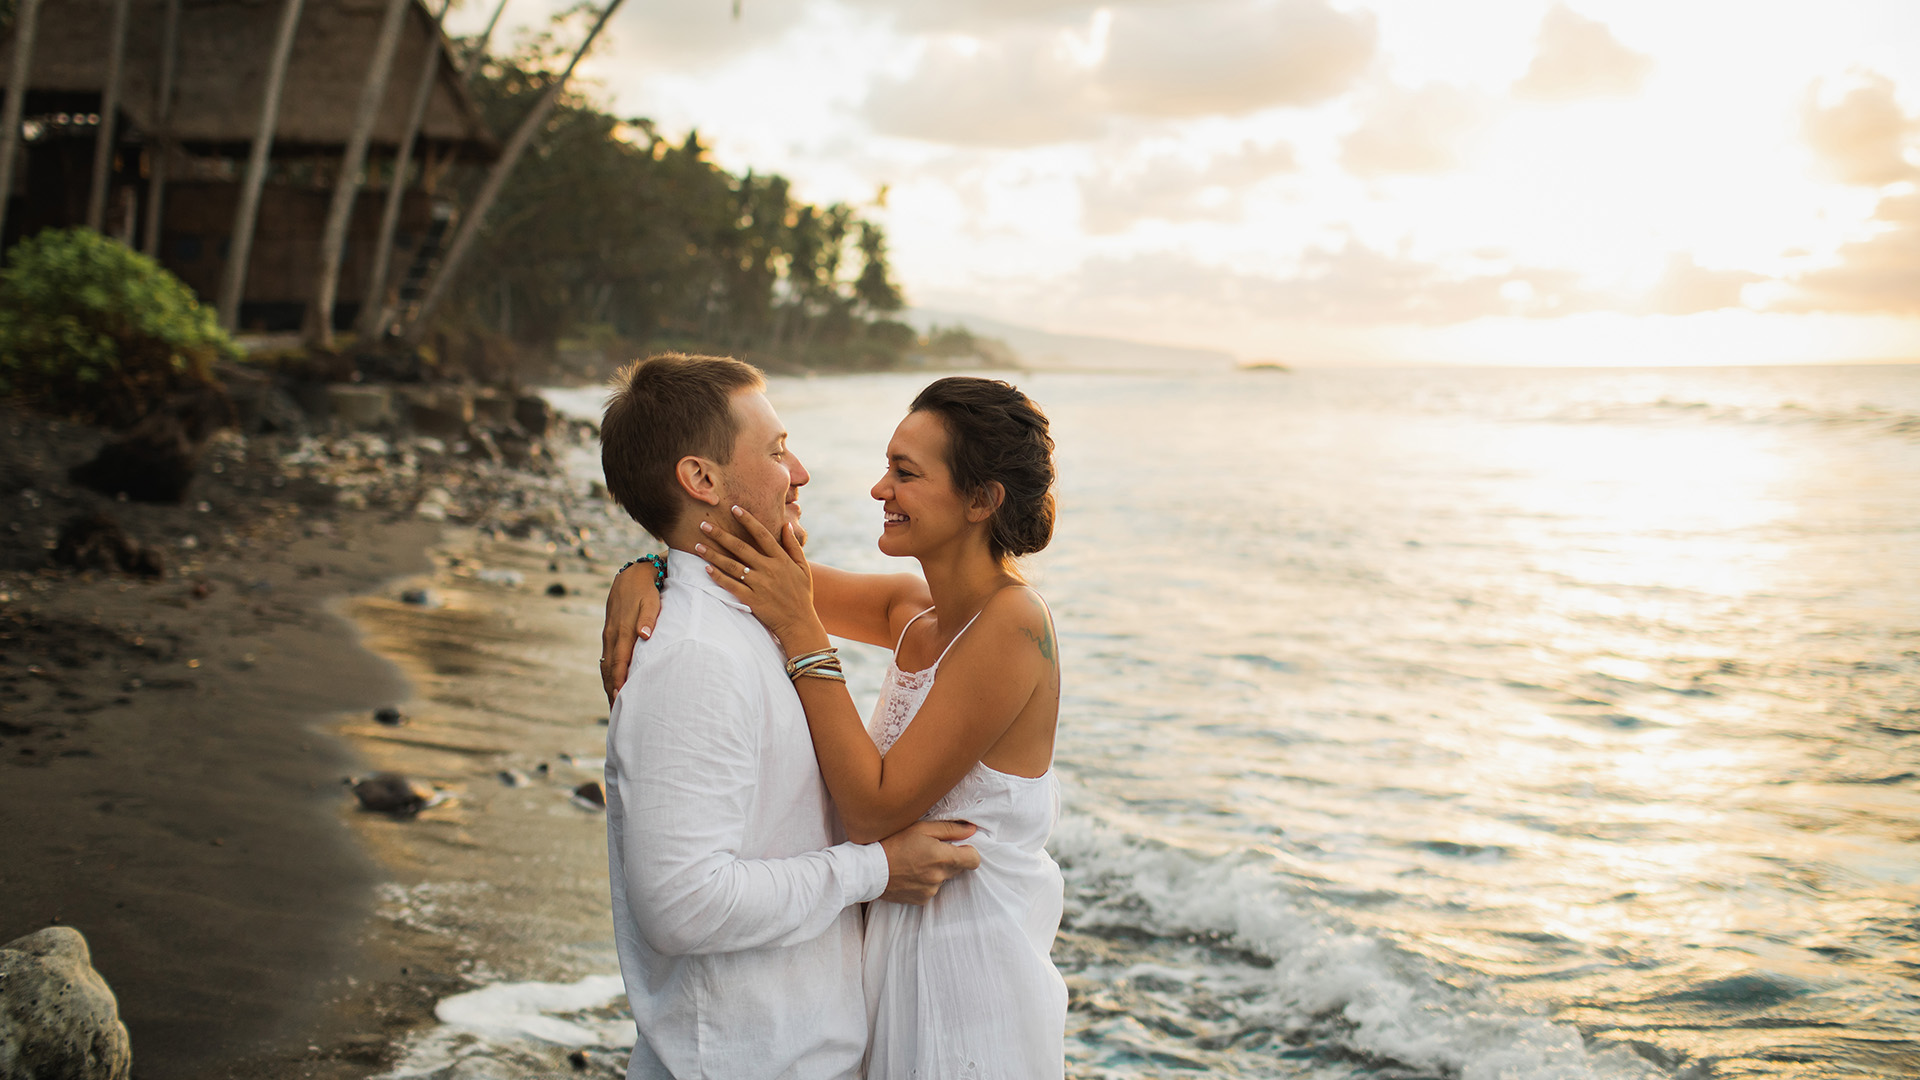 a couple dressed in white embrace on a beach